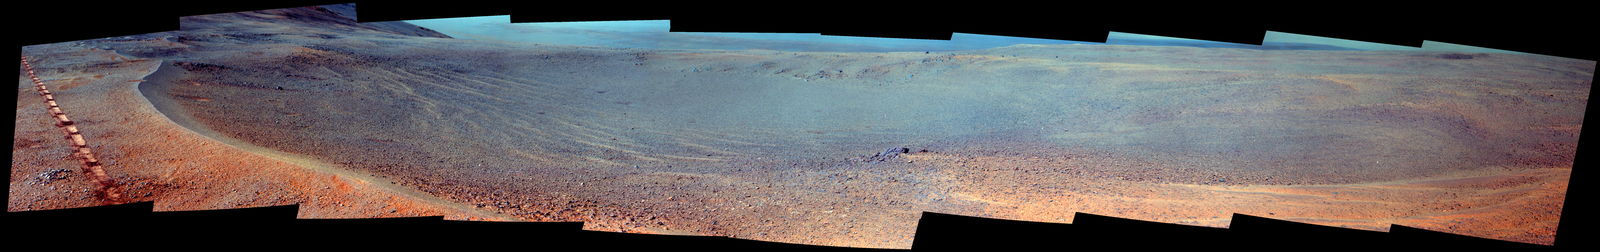 The Pancam on NASA's Opportunity Mars rover imaged this small, relatively fresh crater in April 2017, during the 45th anniversary of the Apollo 16 mission to the moon. The rover team chose to call it "Orion Crater," after the Apollo 16 lunar module. The scene is presented here in enhanced color.